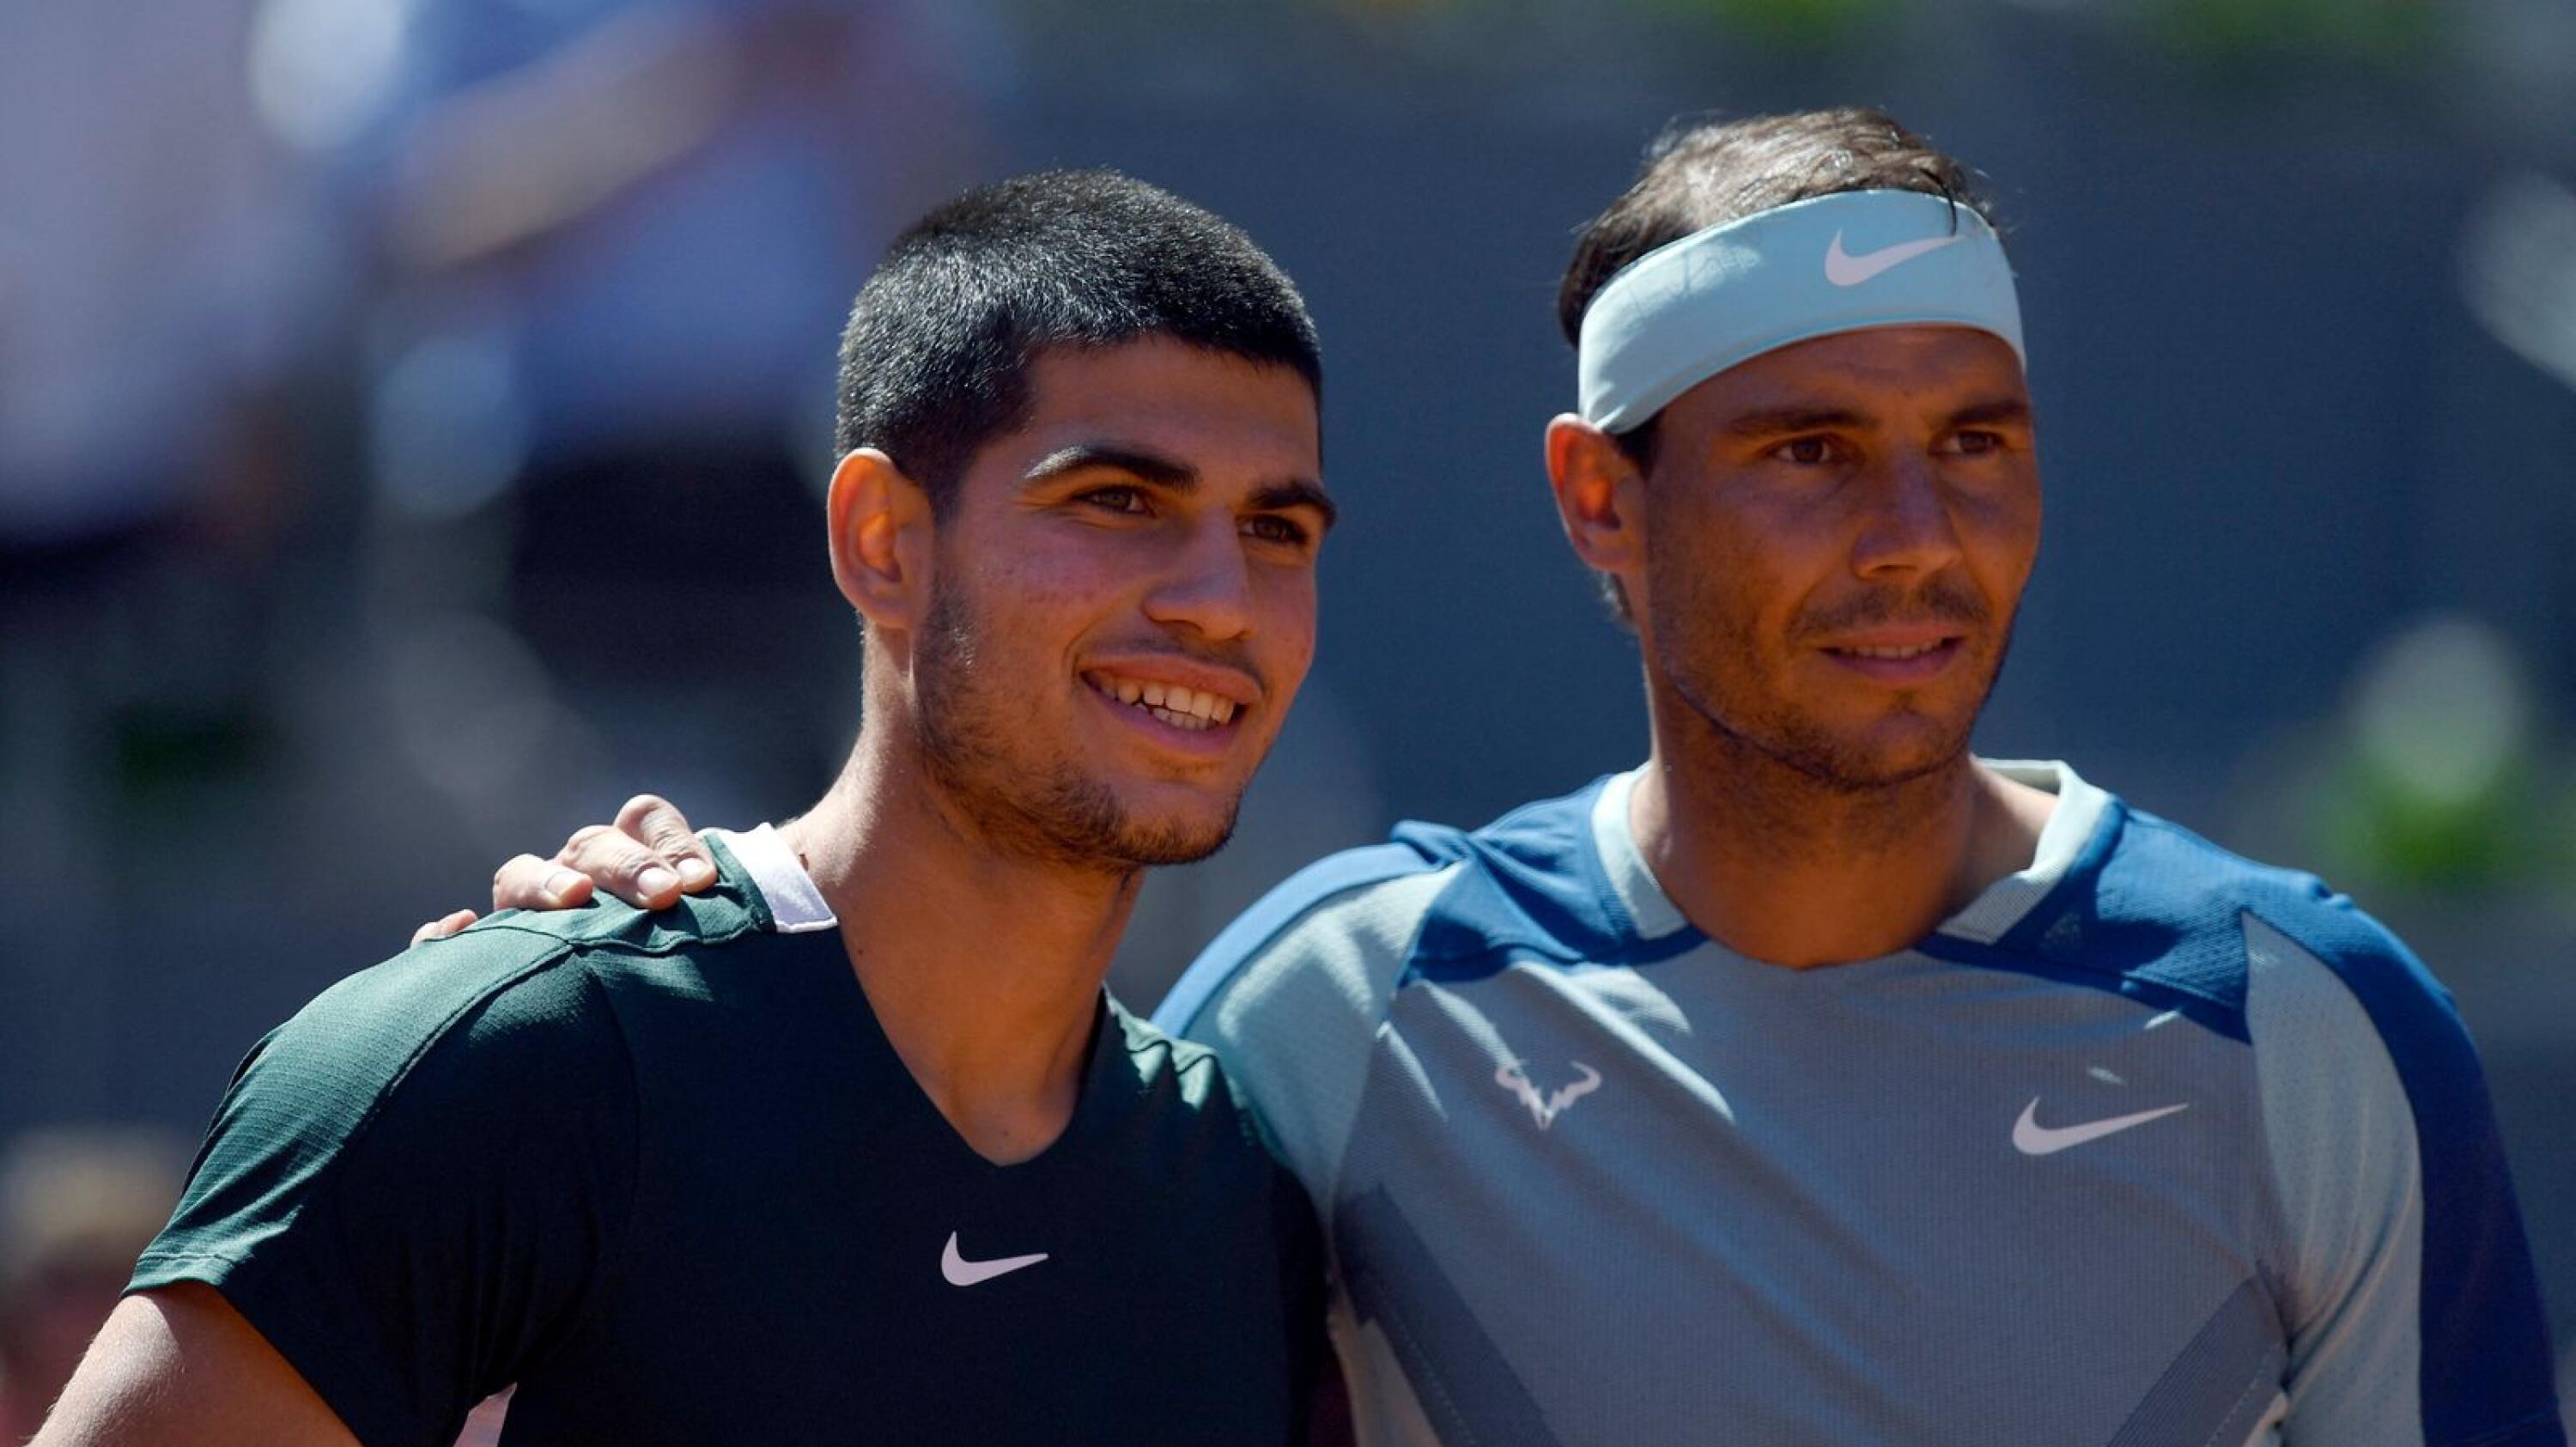 Spain's Rafael Nadal and Carlos Alcaraz pose prior to competing in their Madrid Open quarter-final